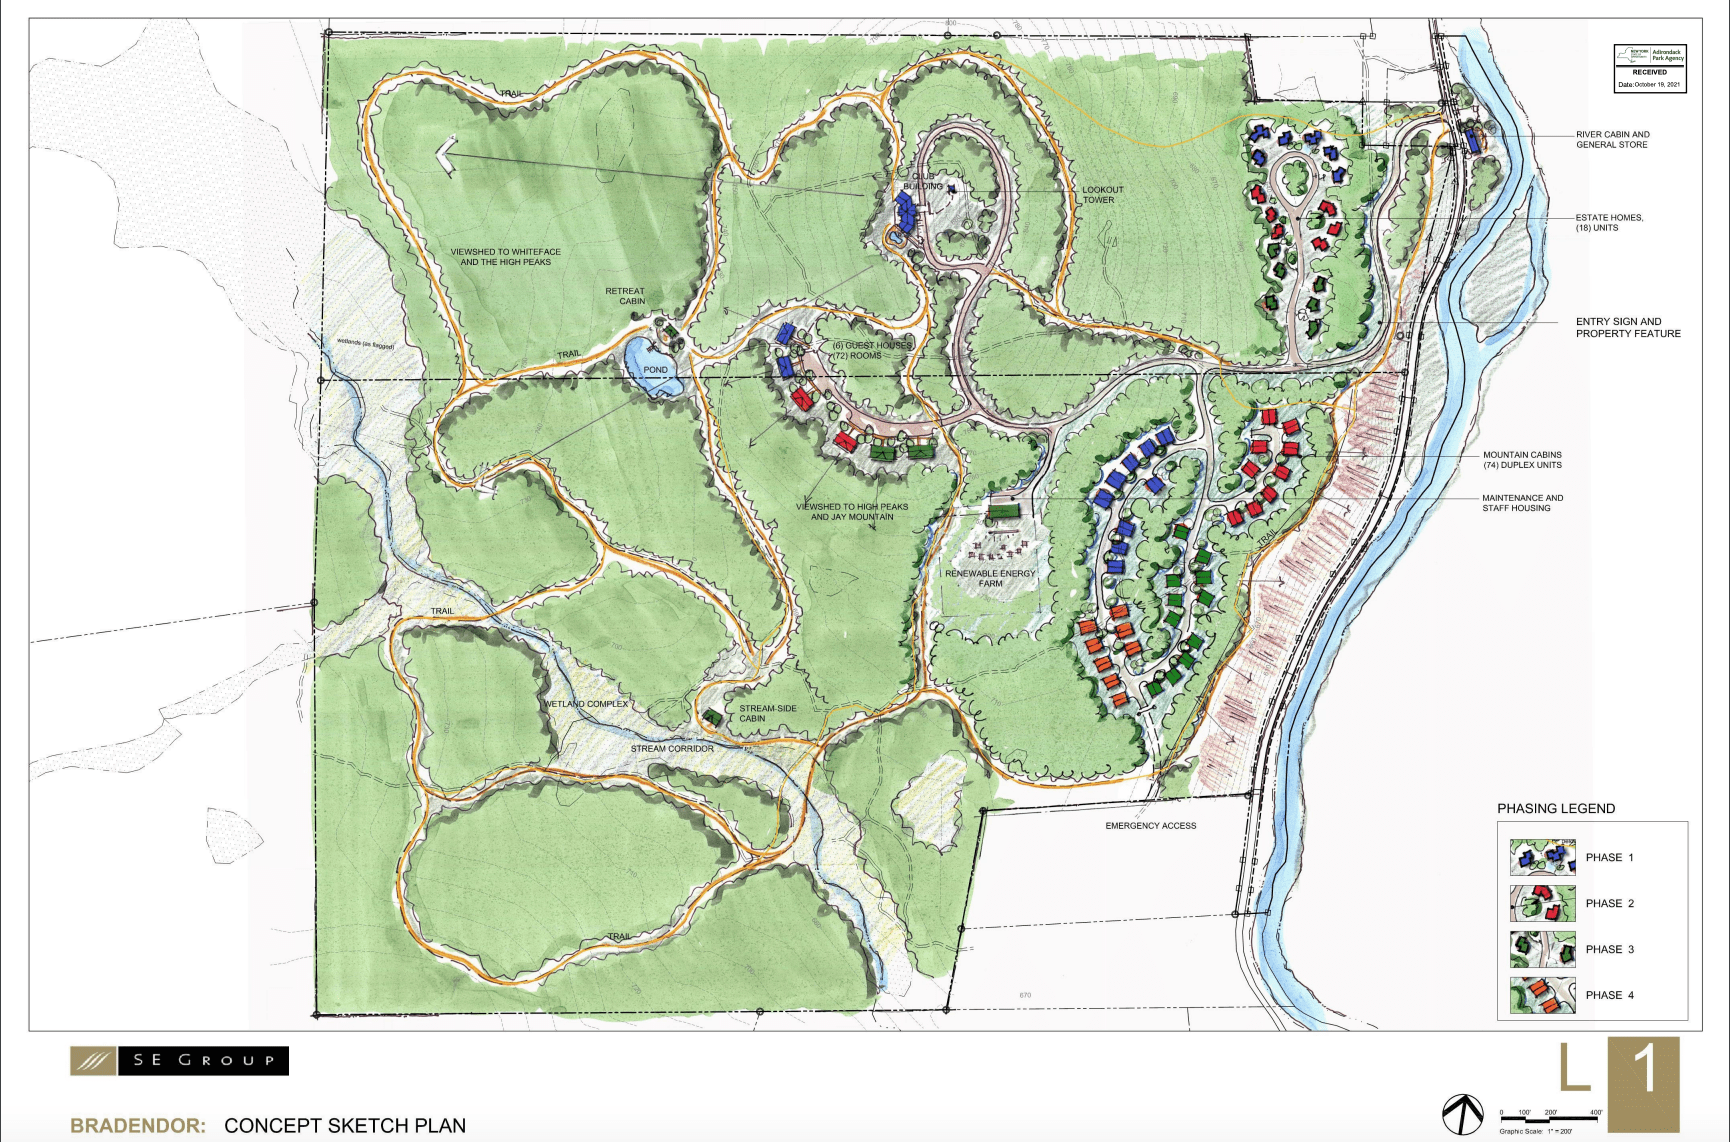 A sketch of the proposed subdivision in Jay, submitted as part of the application submitted to the Adirondack Park Agency.